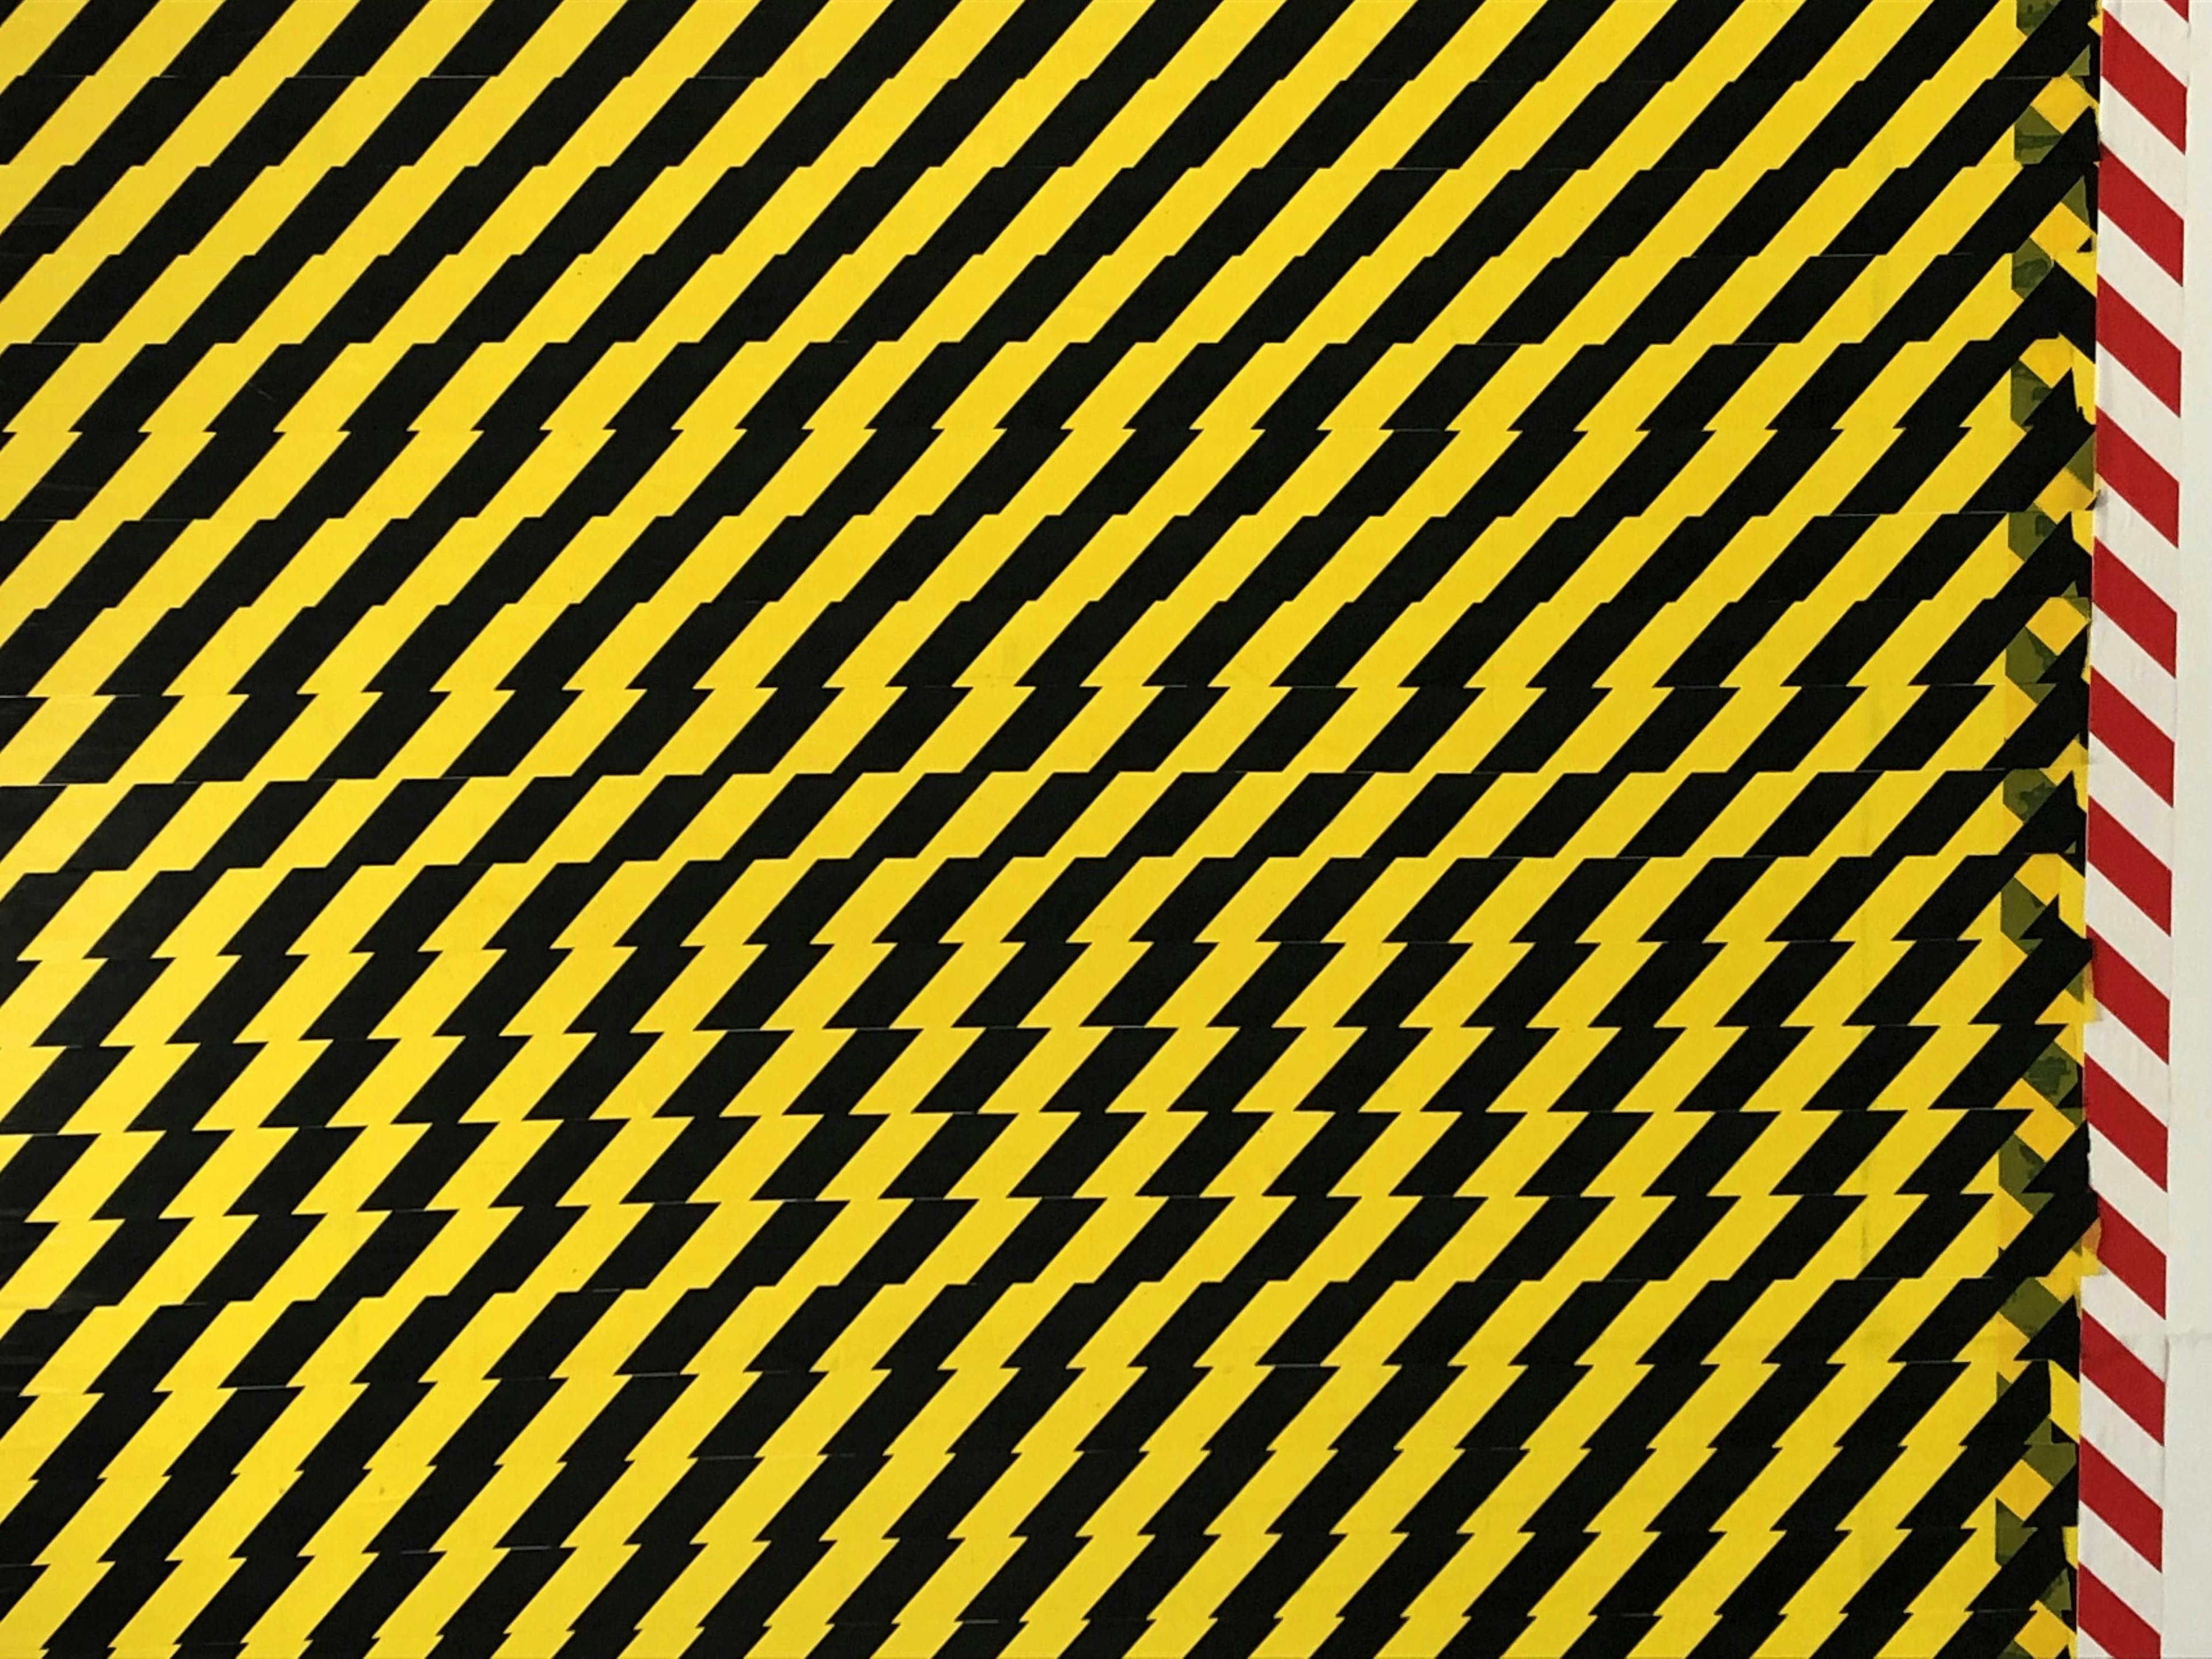 An image detail of black-and-yellow caution tape layered in horizontal striations. To the left, there is a single vertical strip of red-and-white caution tape.